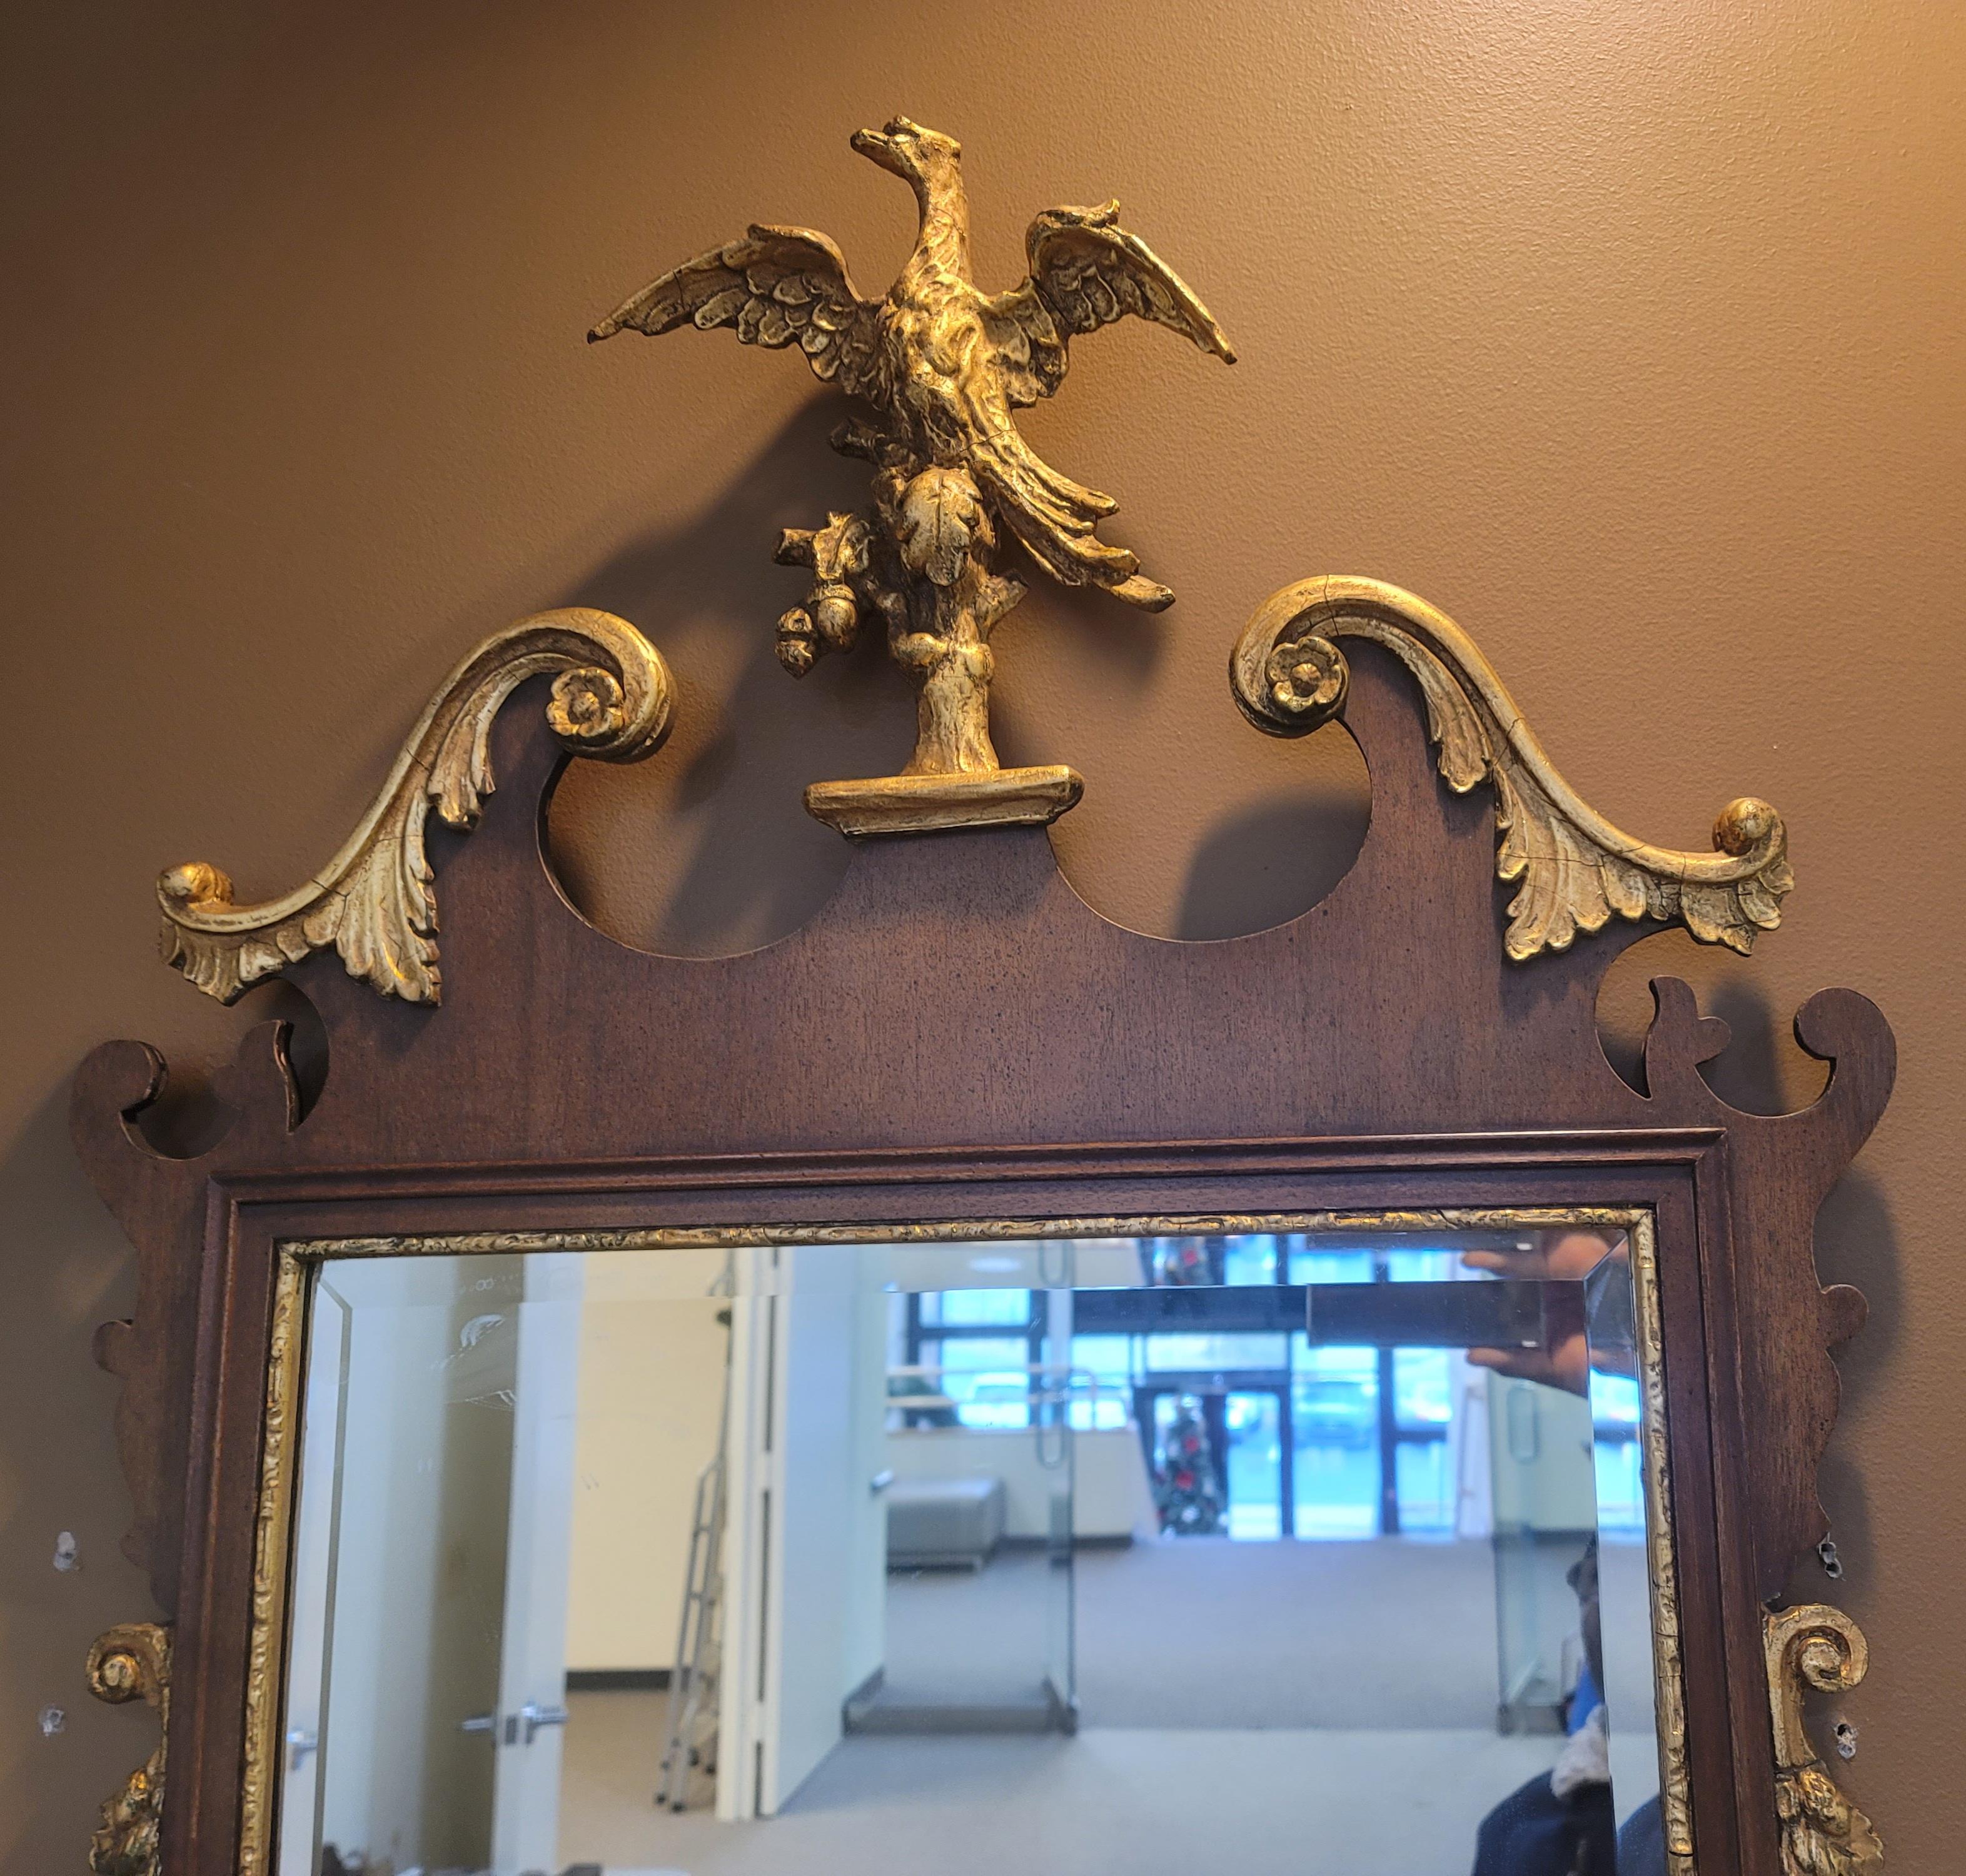 1930s English Chippendale Mahogany Parcel-Gilt Mirror w/ Phoenix Crest Finial For Sale 2